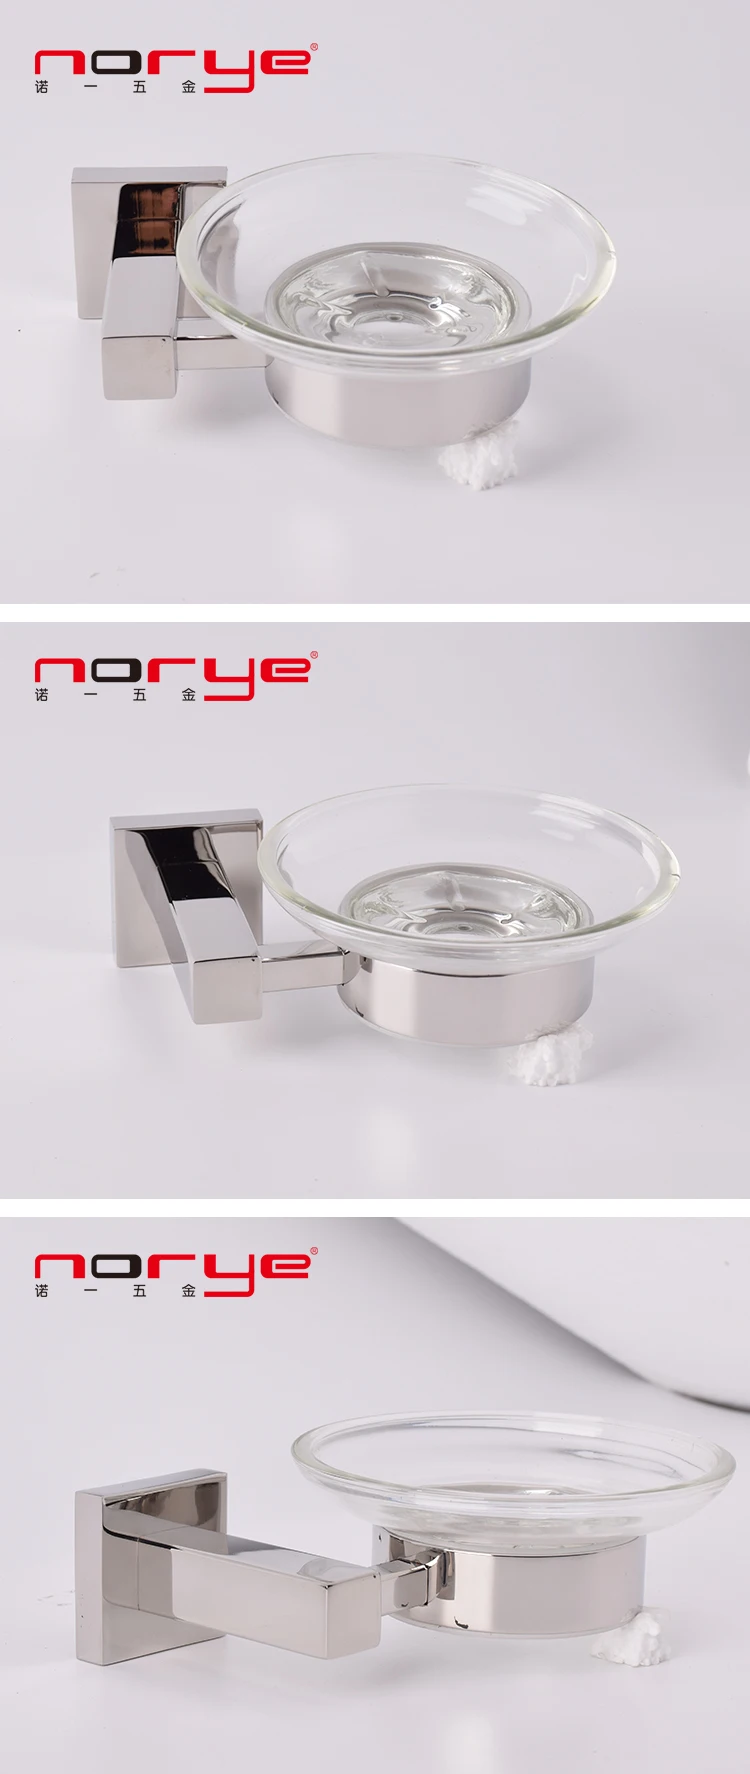 Norye Basket Dish bathroom accessories stainless steel Soap dish Holder Rack